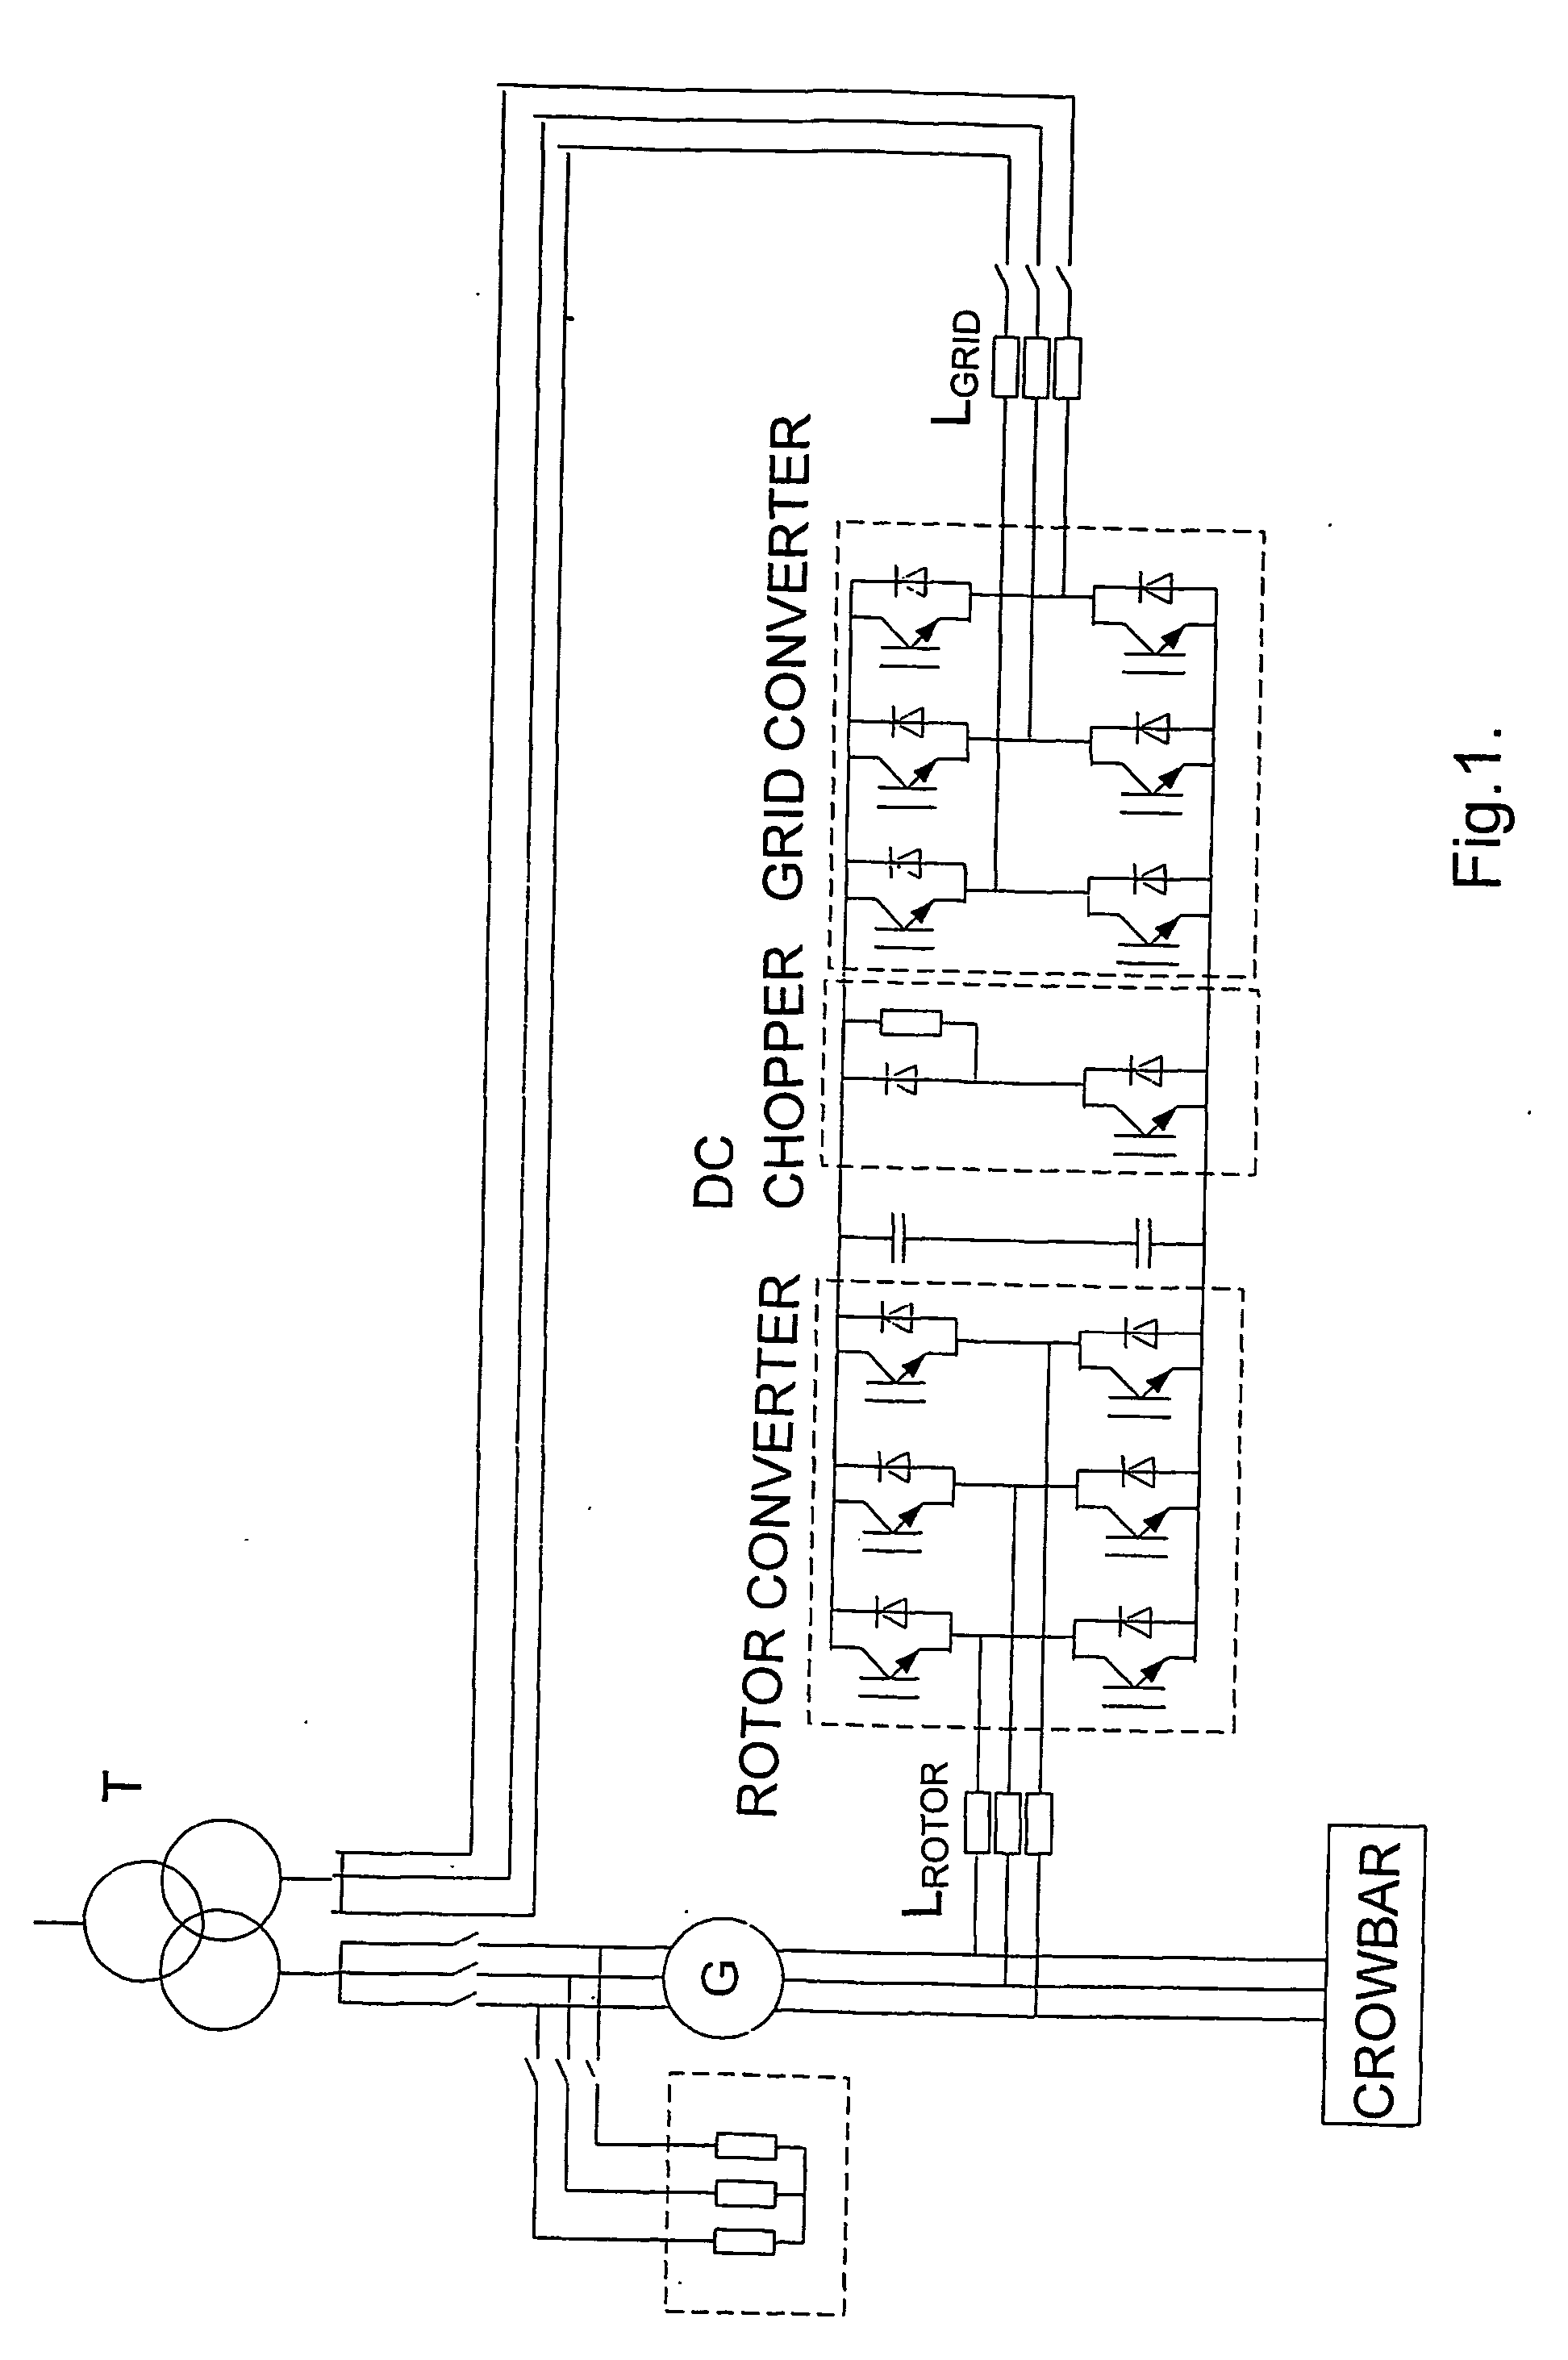 Method for controlling a power-grid connected wind turbine generator during grid faults and apparatus for implementing said method